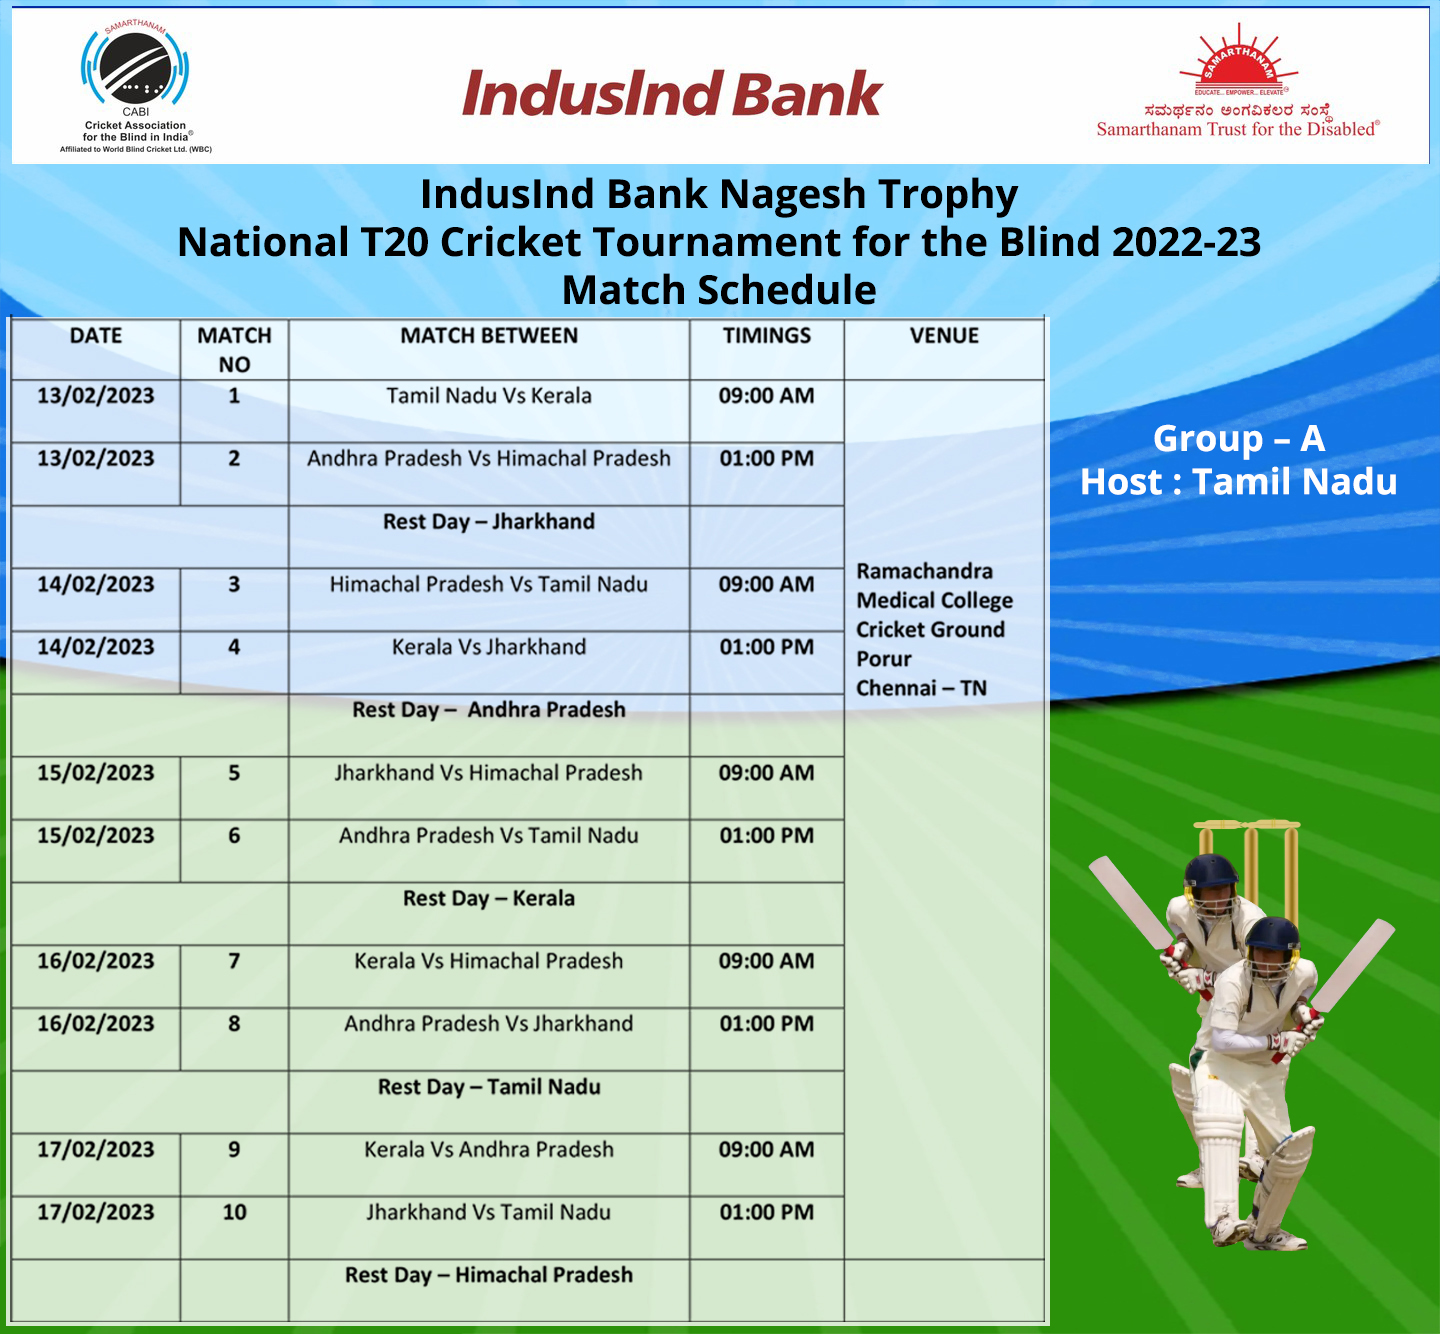 Match Schedules for Group A, C and D of IndusInd Bank Nagesh Trophy National T20 Cricket Tournament for the Blind 2022 – 2023